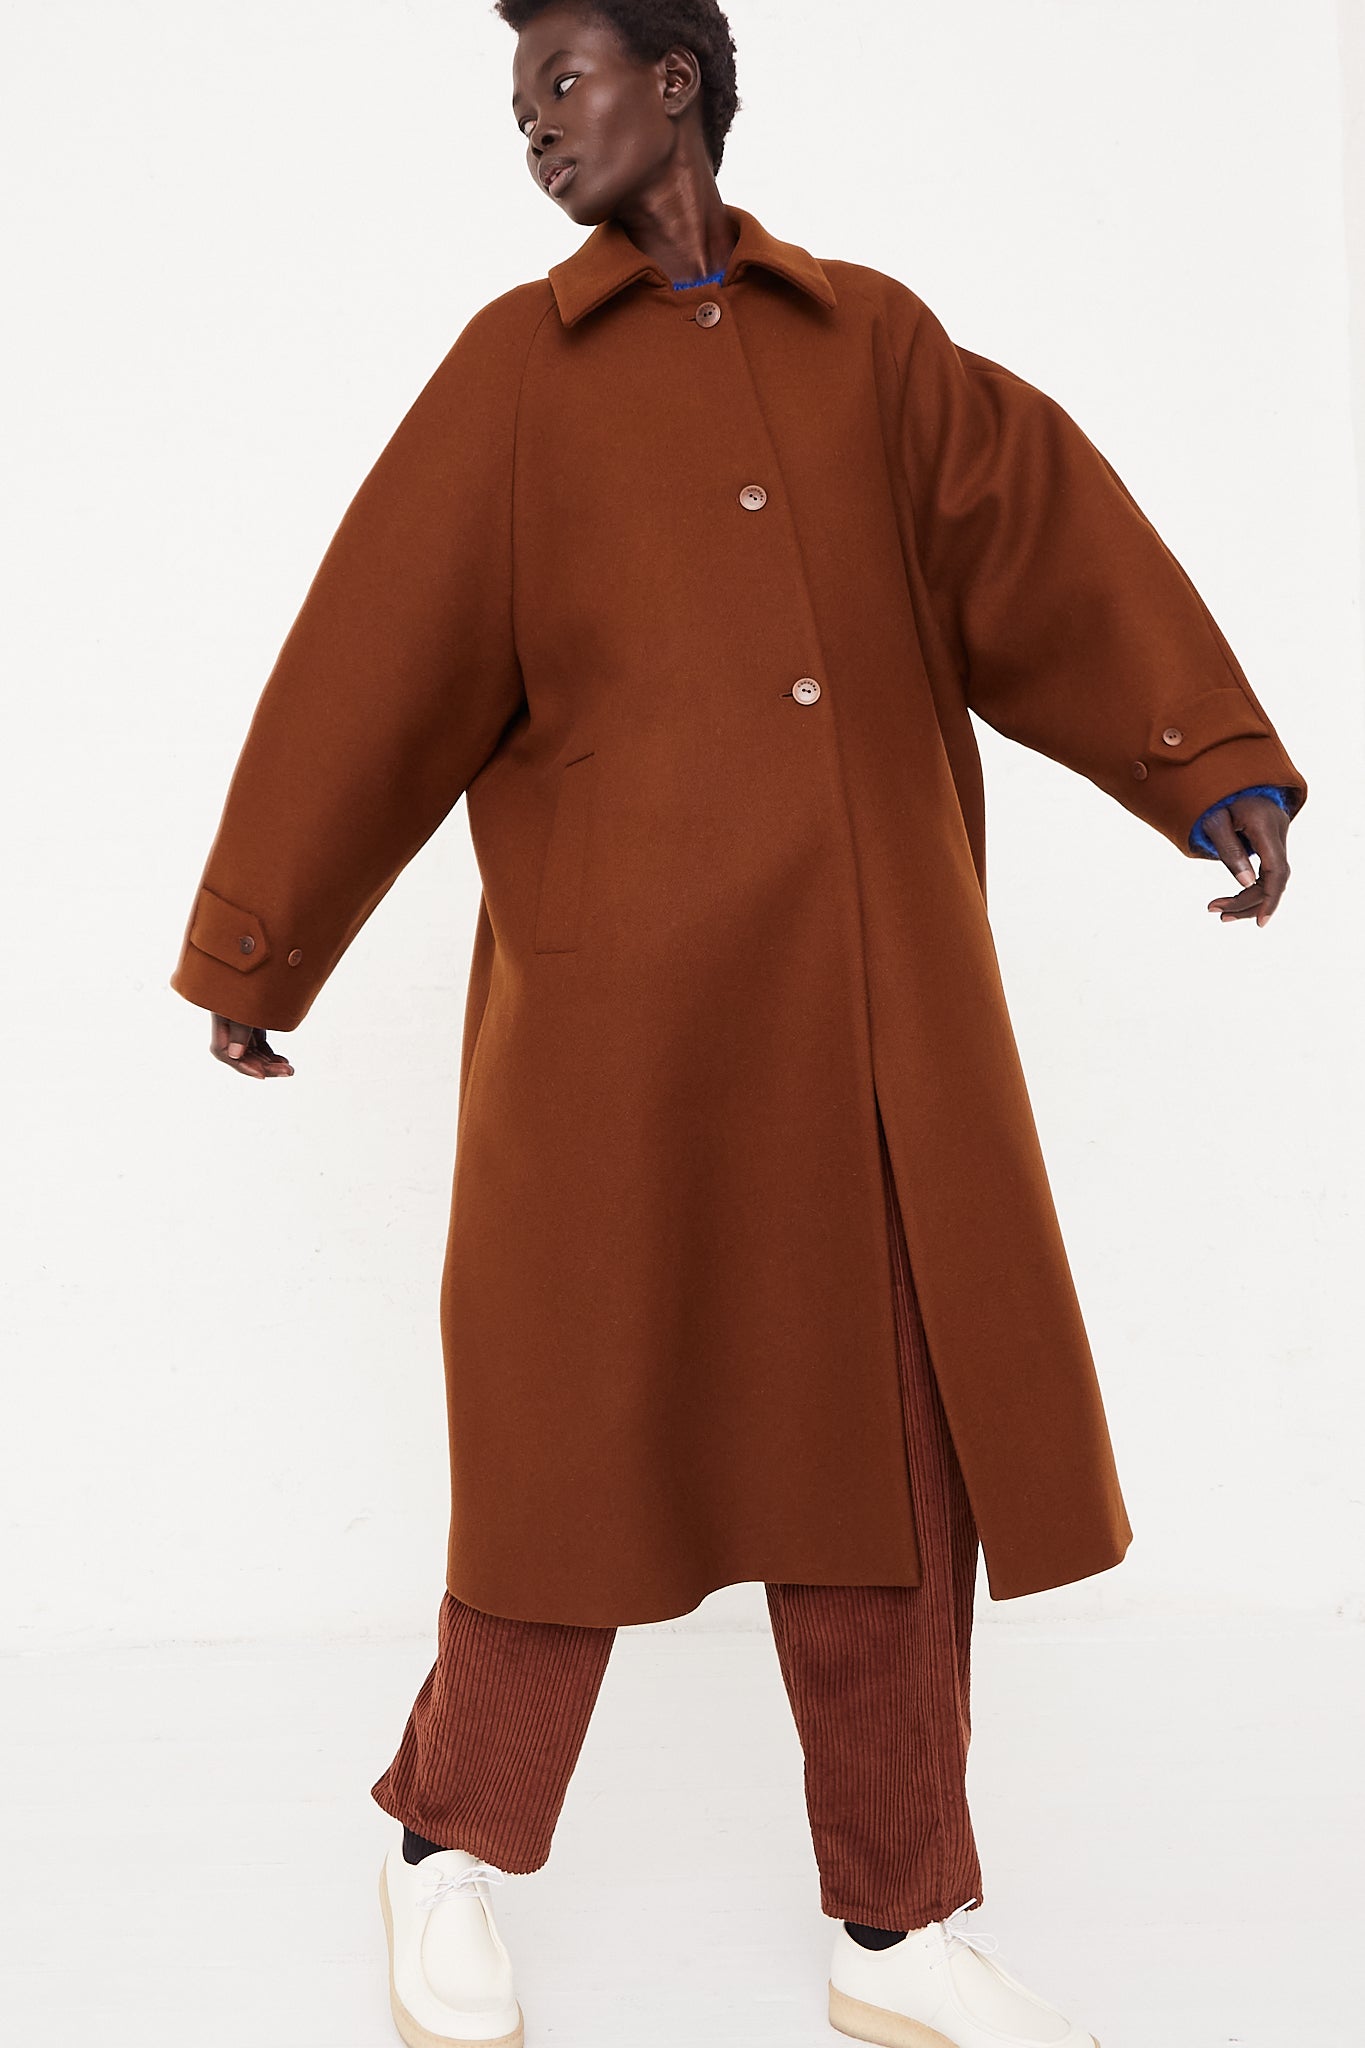 CORDERA Wool Coat Camel | Oroboro Store | Front image of coat buttoned closed full length on model